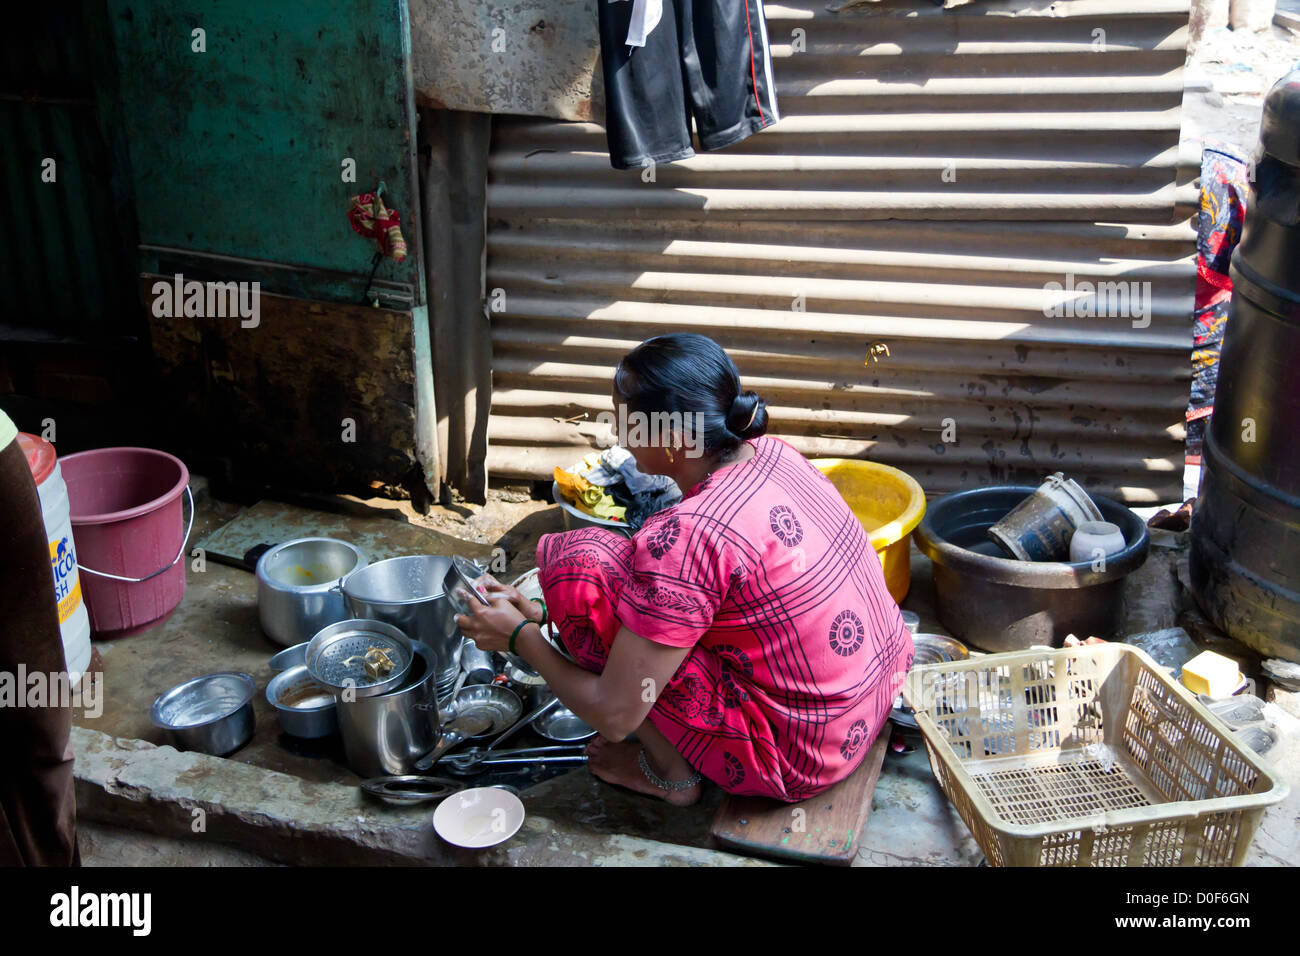 Woman washing the Dishes on the Street in the Dharavi Slum in Mumbai, India Stock Photo